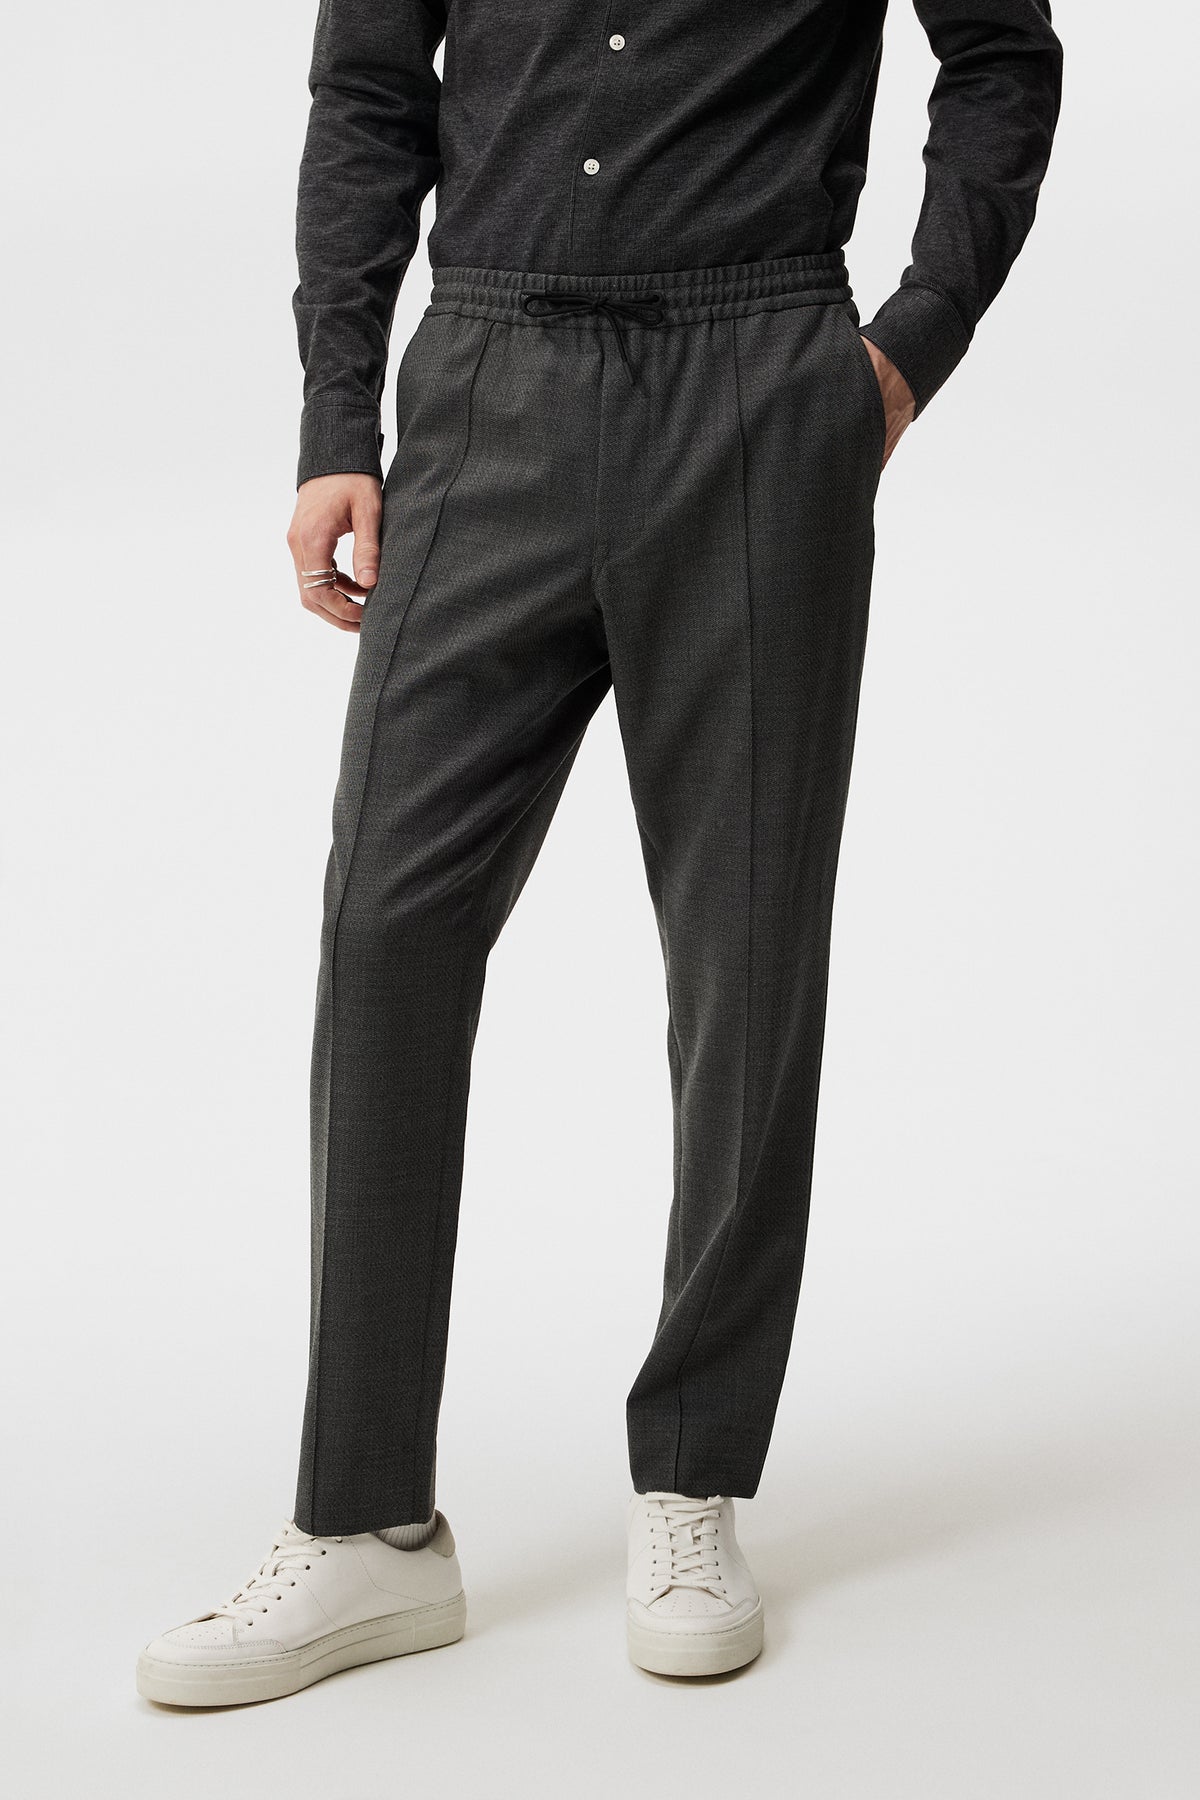 High waisted Sasha trousers (or the perfect tailored pants!)